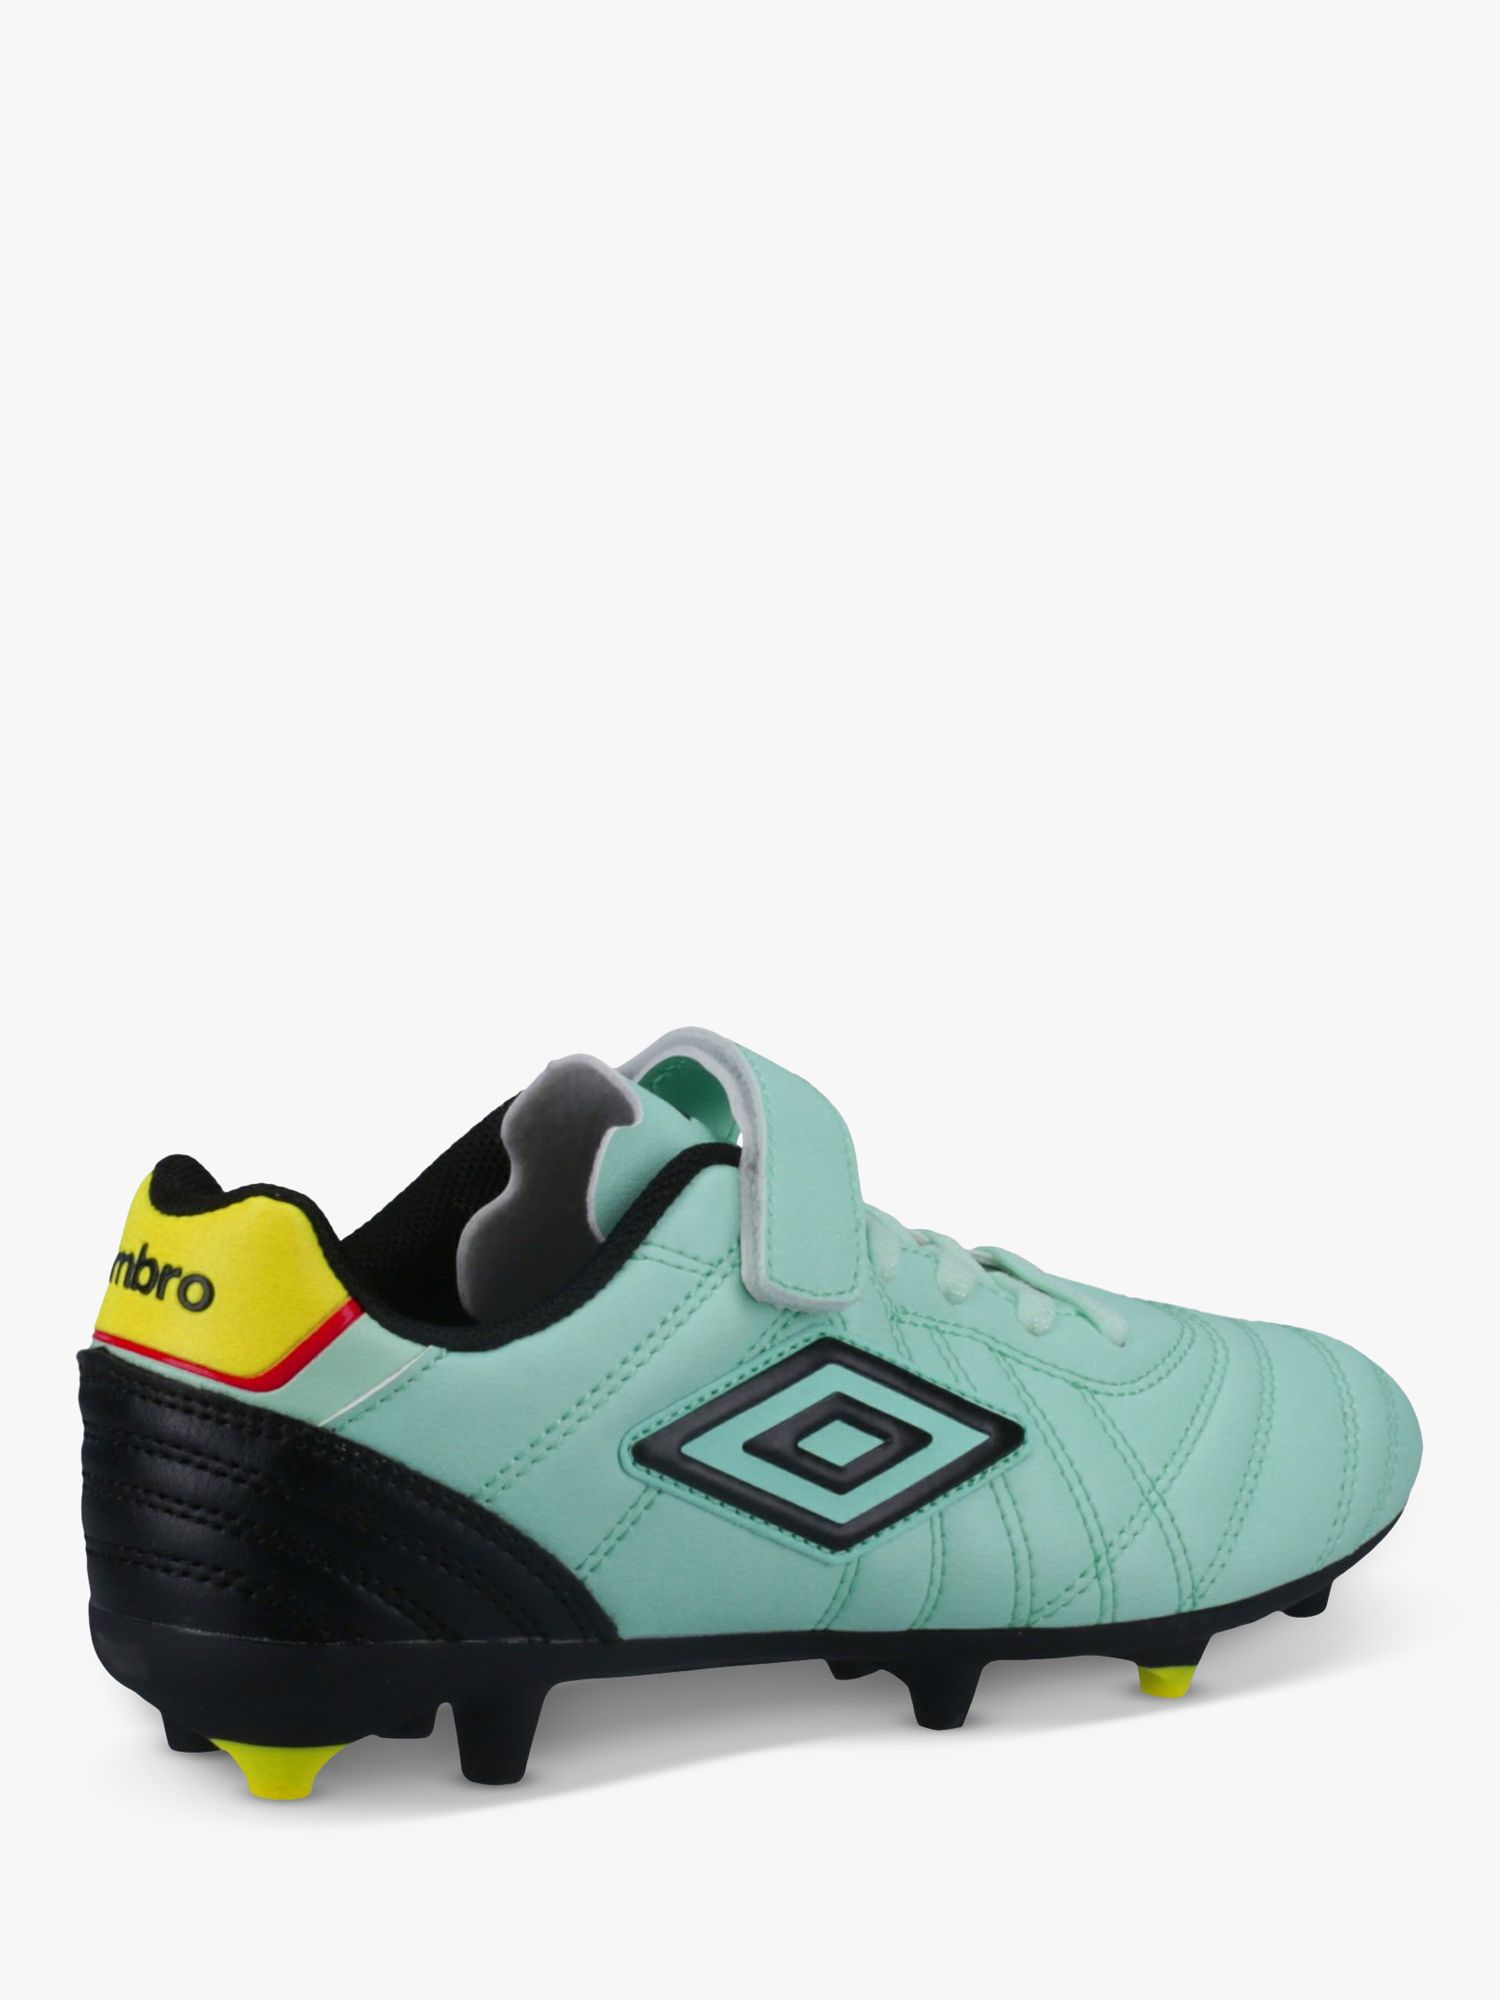 Buy Umbro Speciali Liga Firm Ground Football Boots Online at johnlewis.com